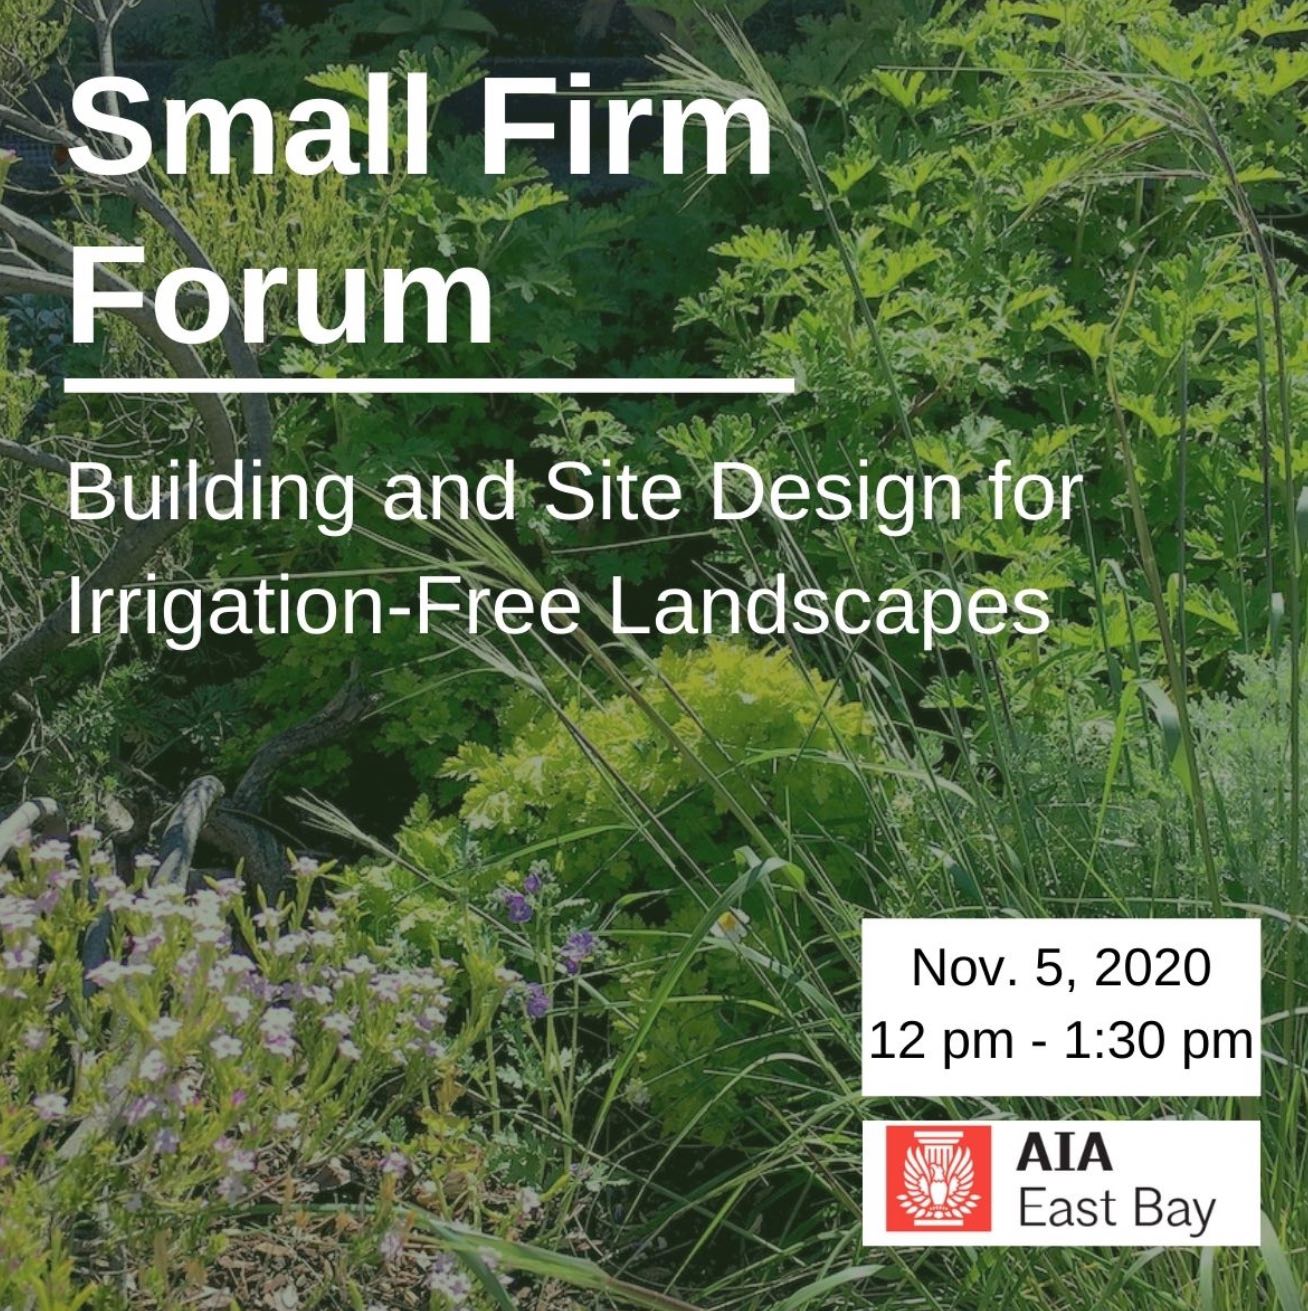 Flyer for a workshop led by John Kamp of Prairieform and sponsored by the AIA East Bay on site and building design for irrigation-free landscapes.